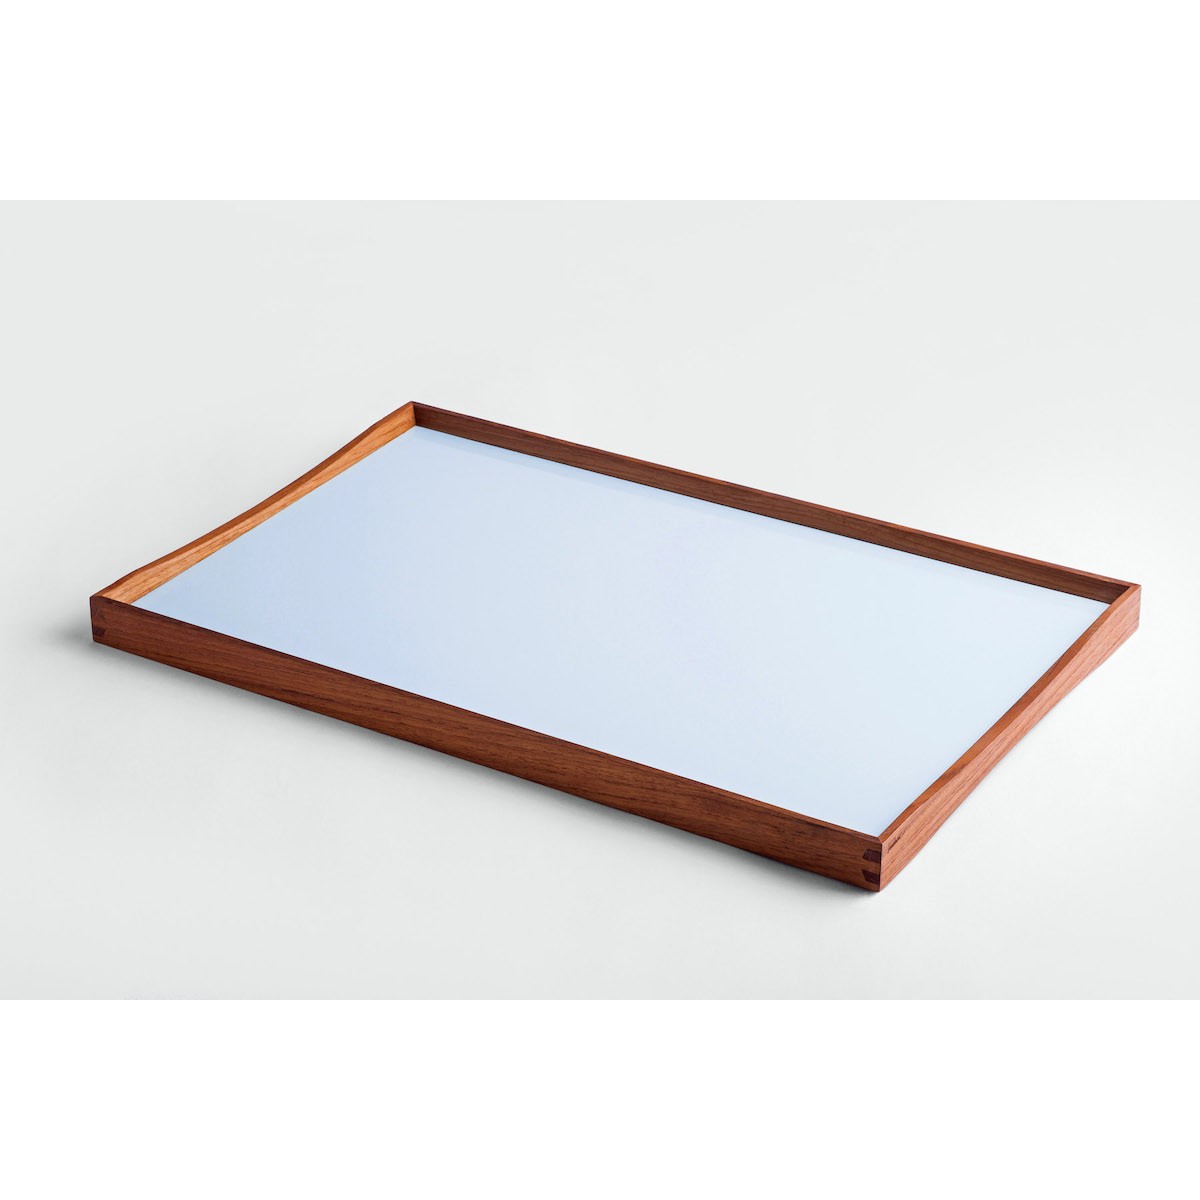 38 x 51 cm – Turning tray – blue and black - L